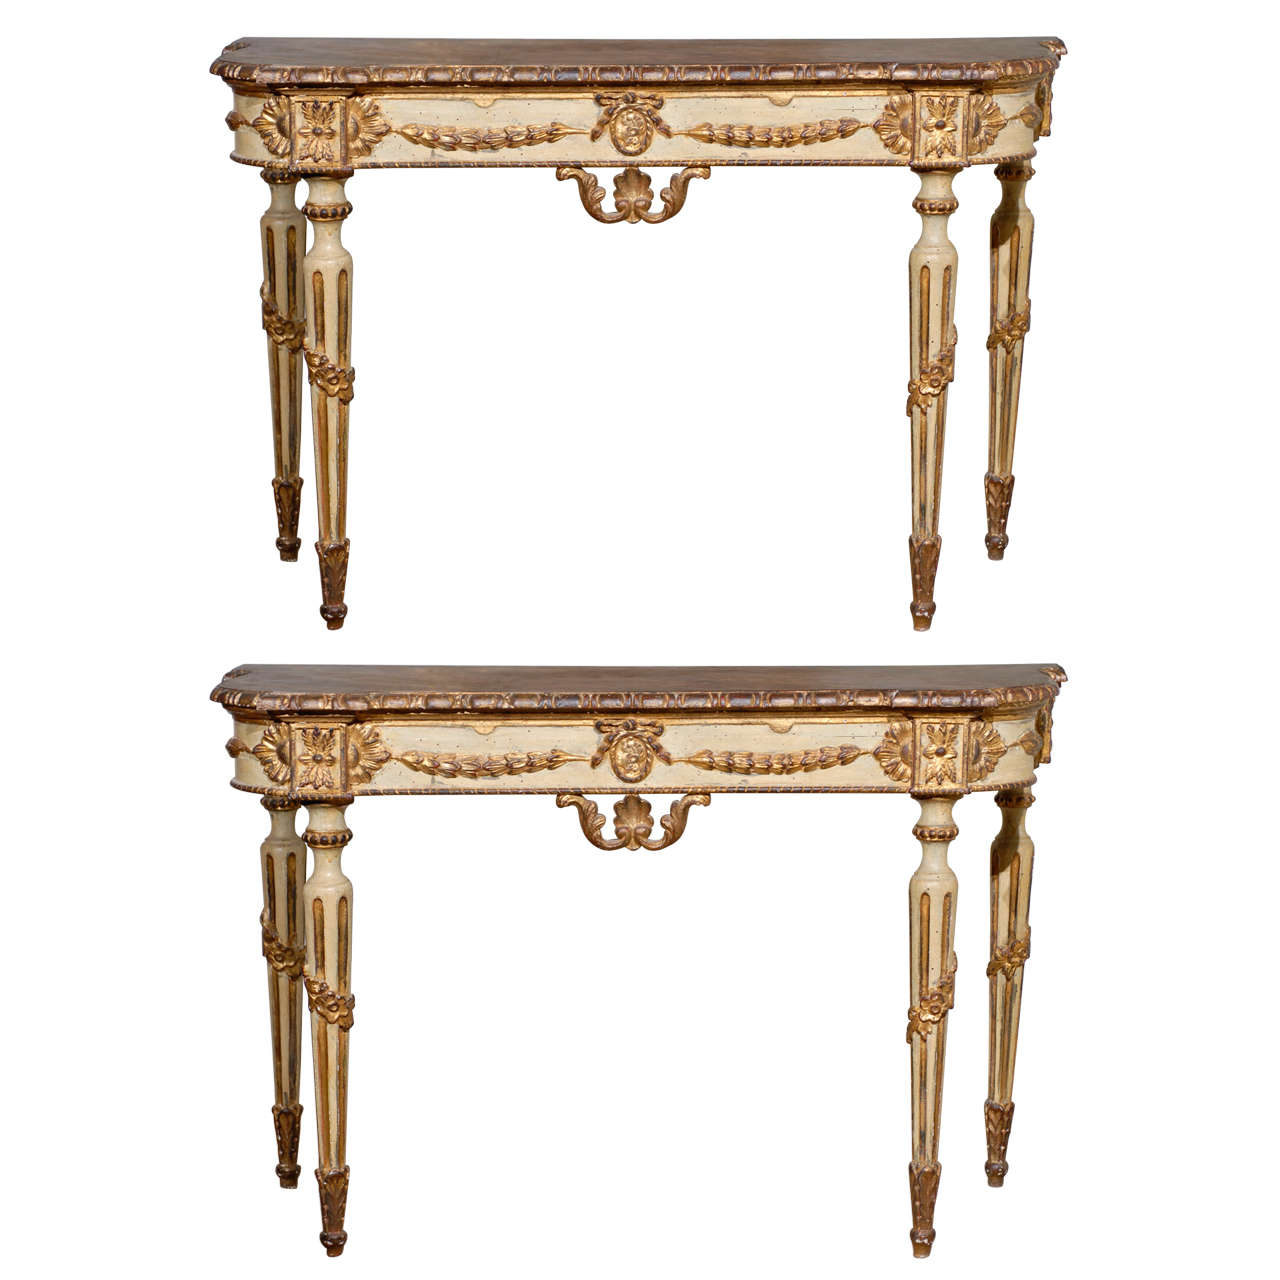 Pair of Painted Neoclassical Style Console Tables